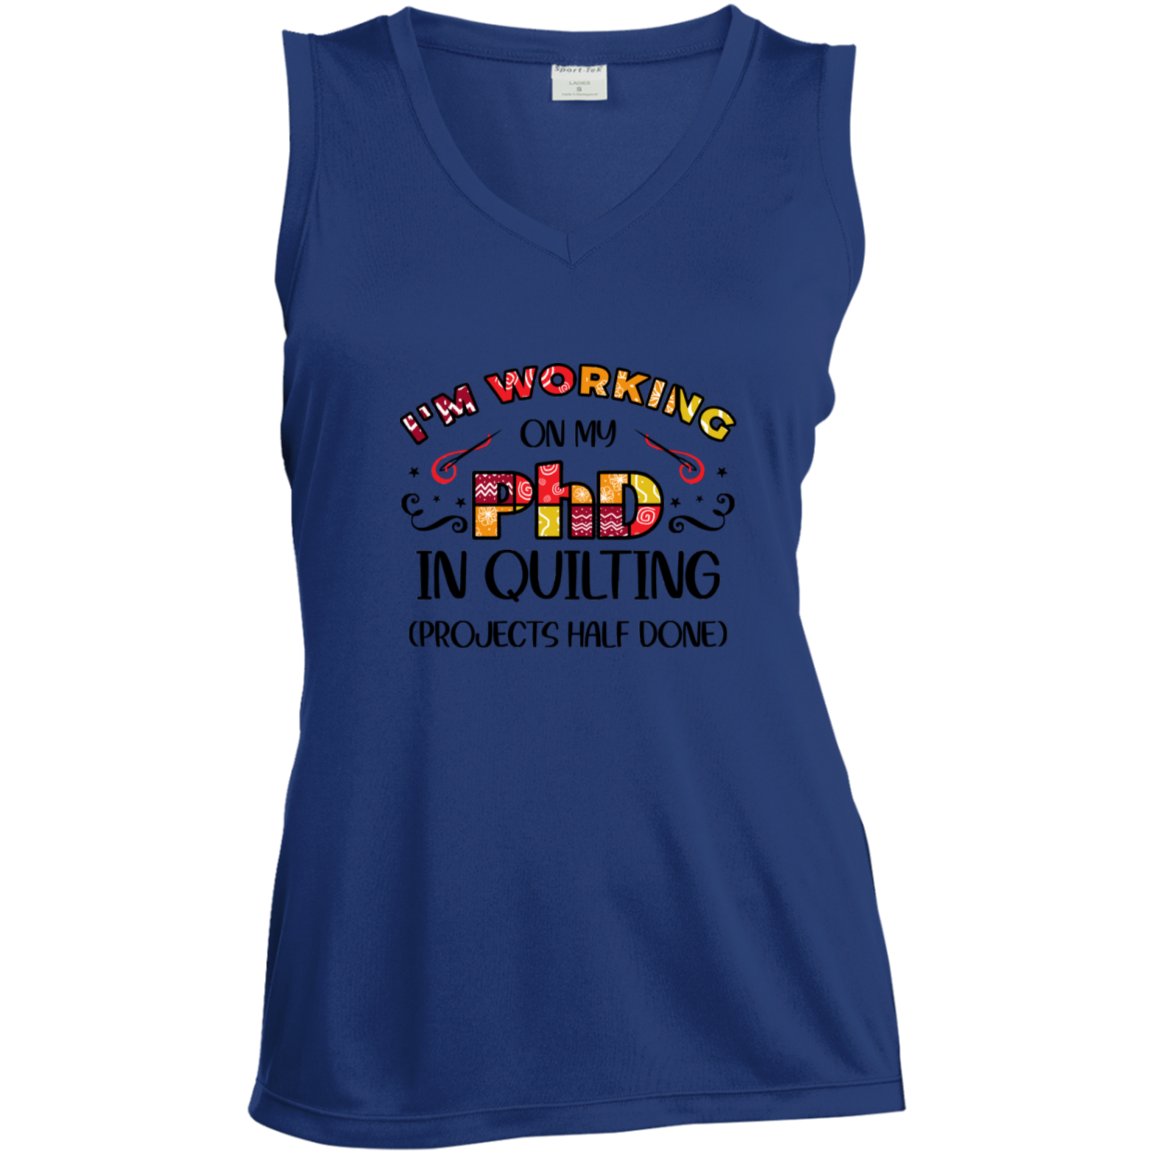 PhD in Quilting Ladies' Sleeveless Moisture Absorbing V-Neck